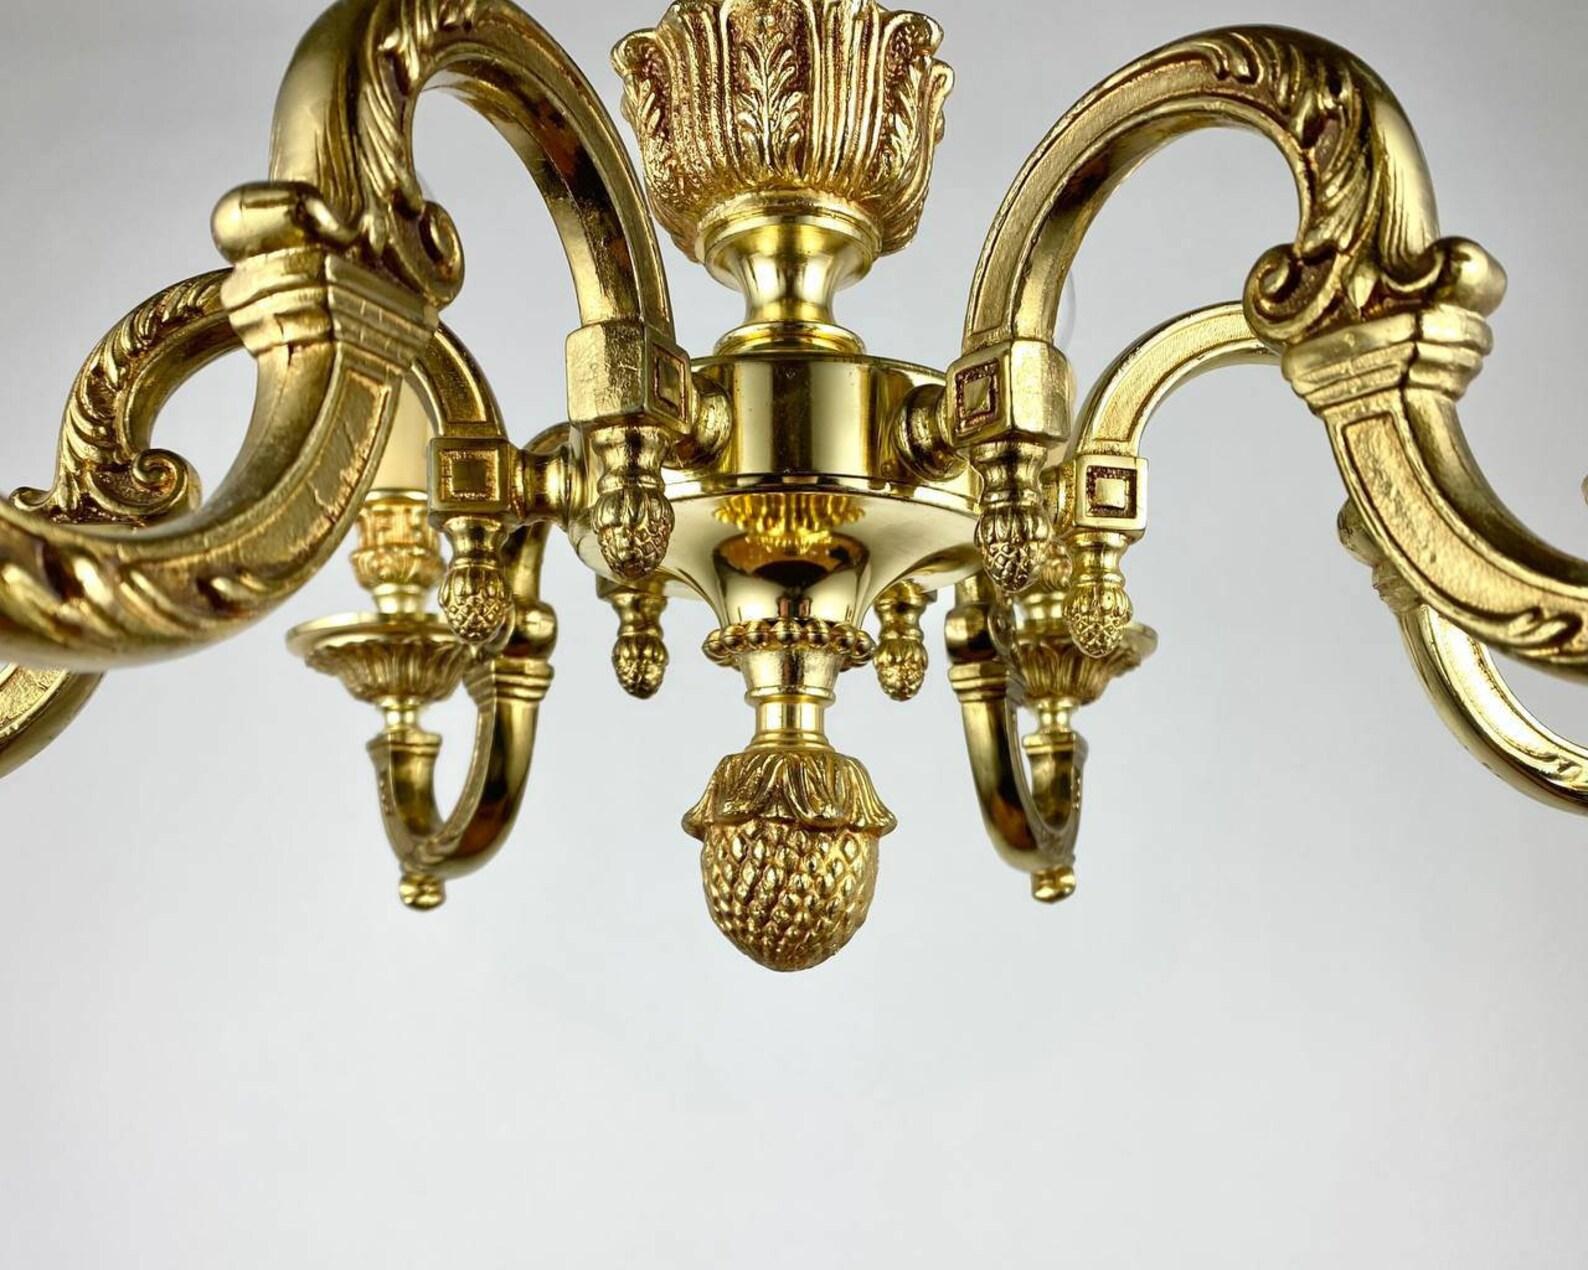 Brass Magnificent Bronze Chandelier In Empire Style  Six Light Pendant Lighting For Sale